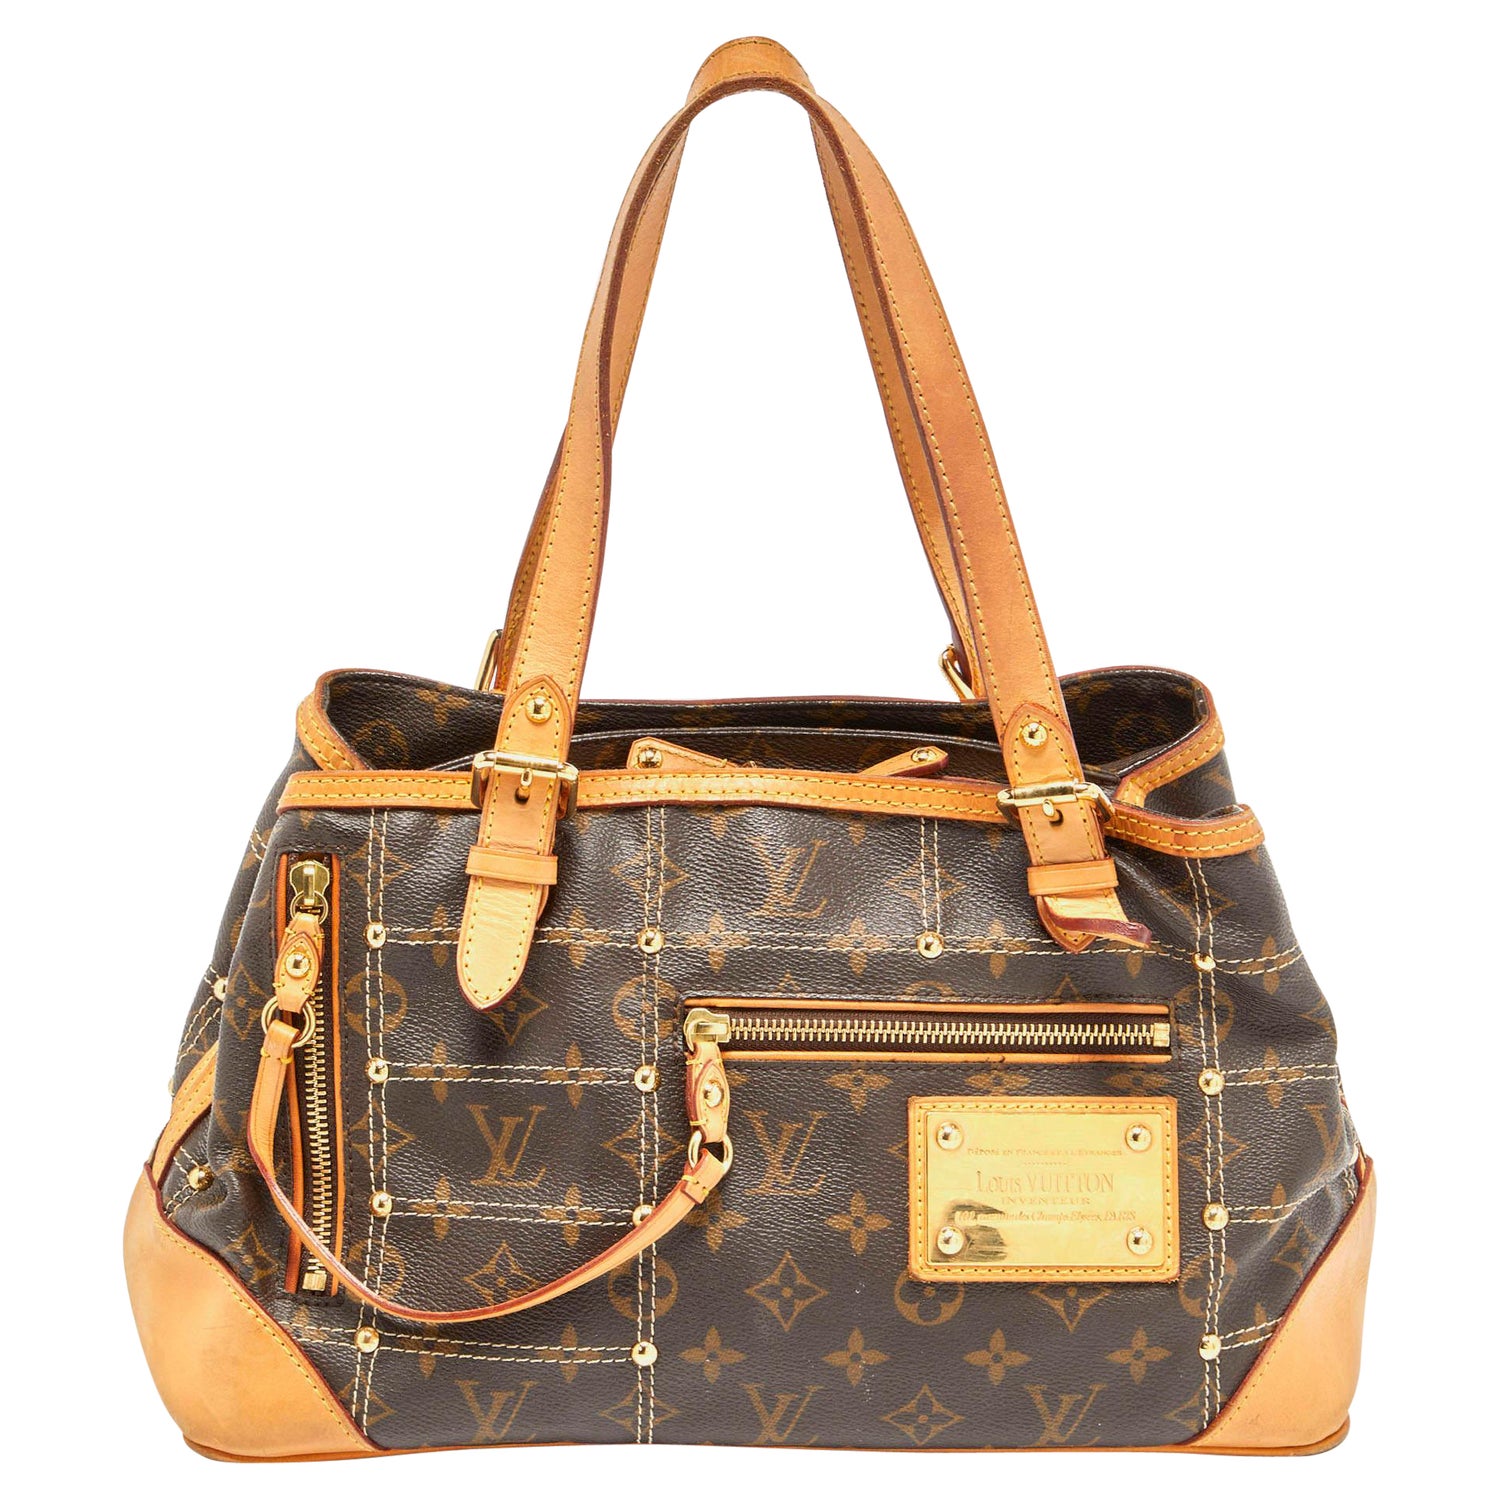 WHAT'S IN MY BAG? 2021, Louis Vuitton KIMONO MM MNG TOTE